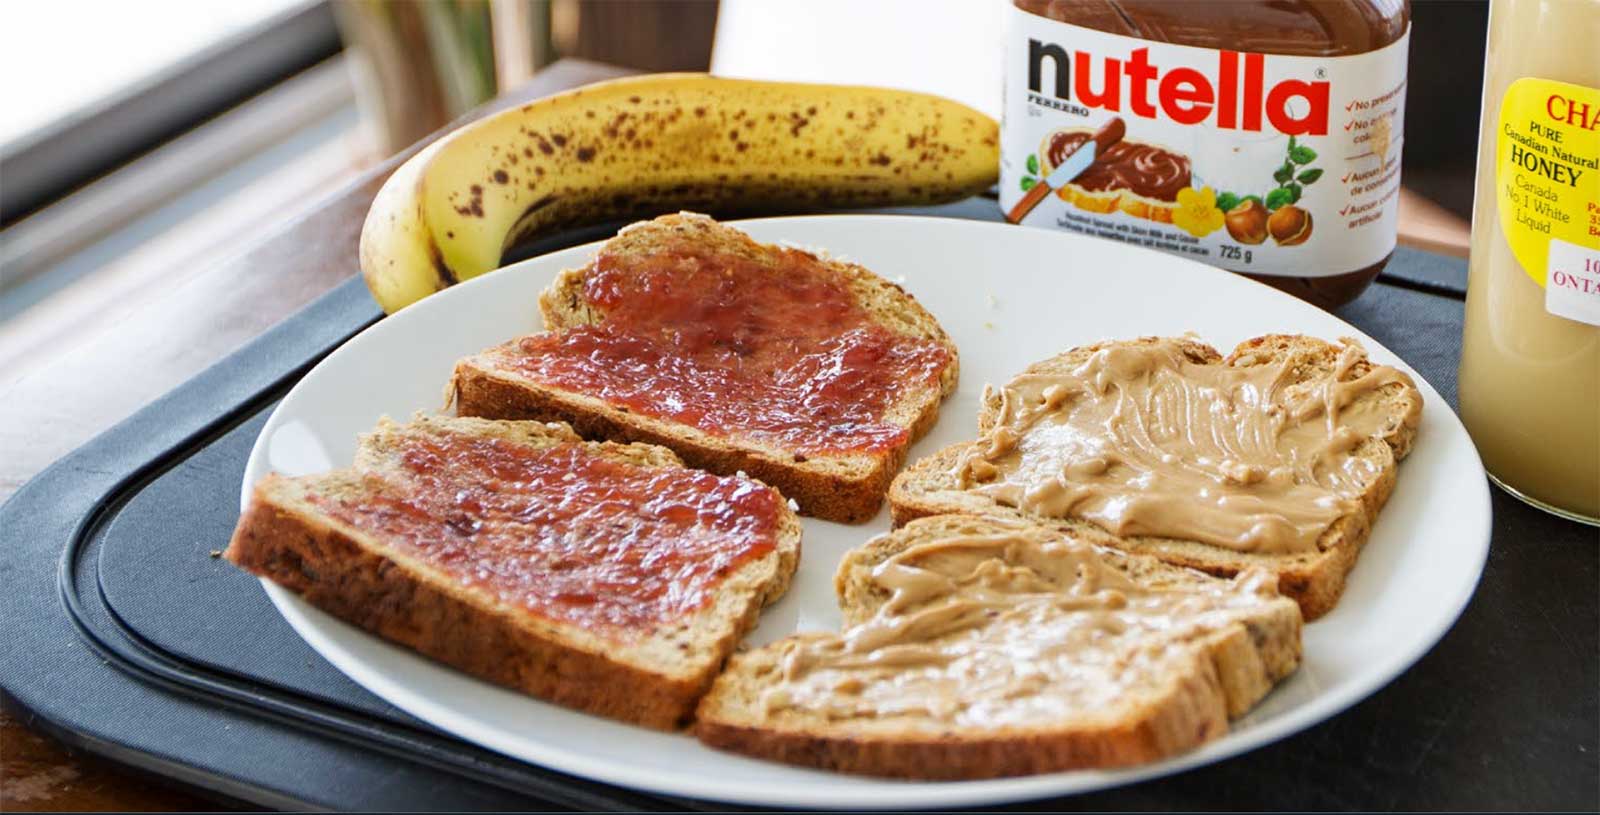 Illustration of a high-calorie peanut butter and banana sandwich meal for bulking.